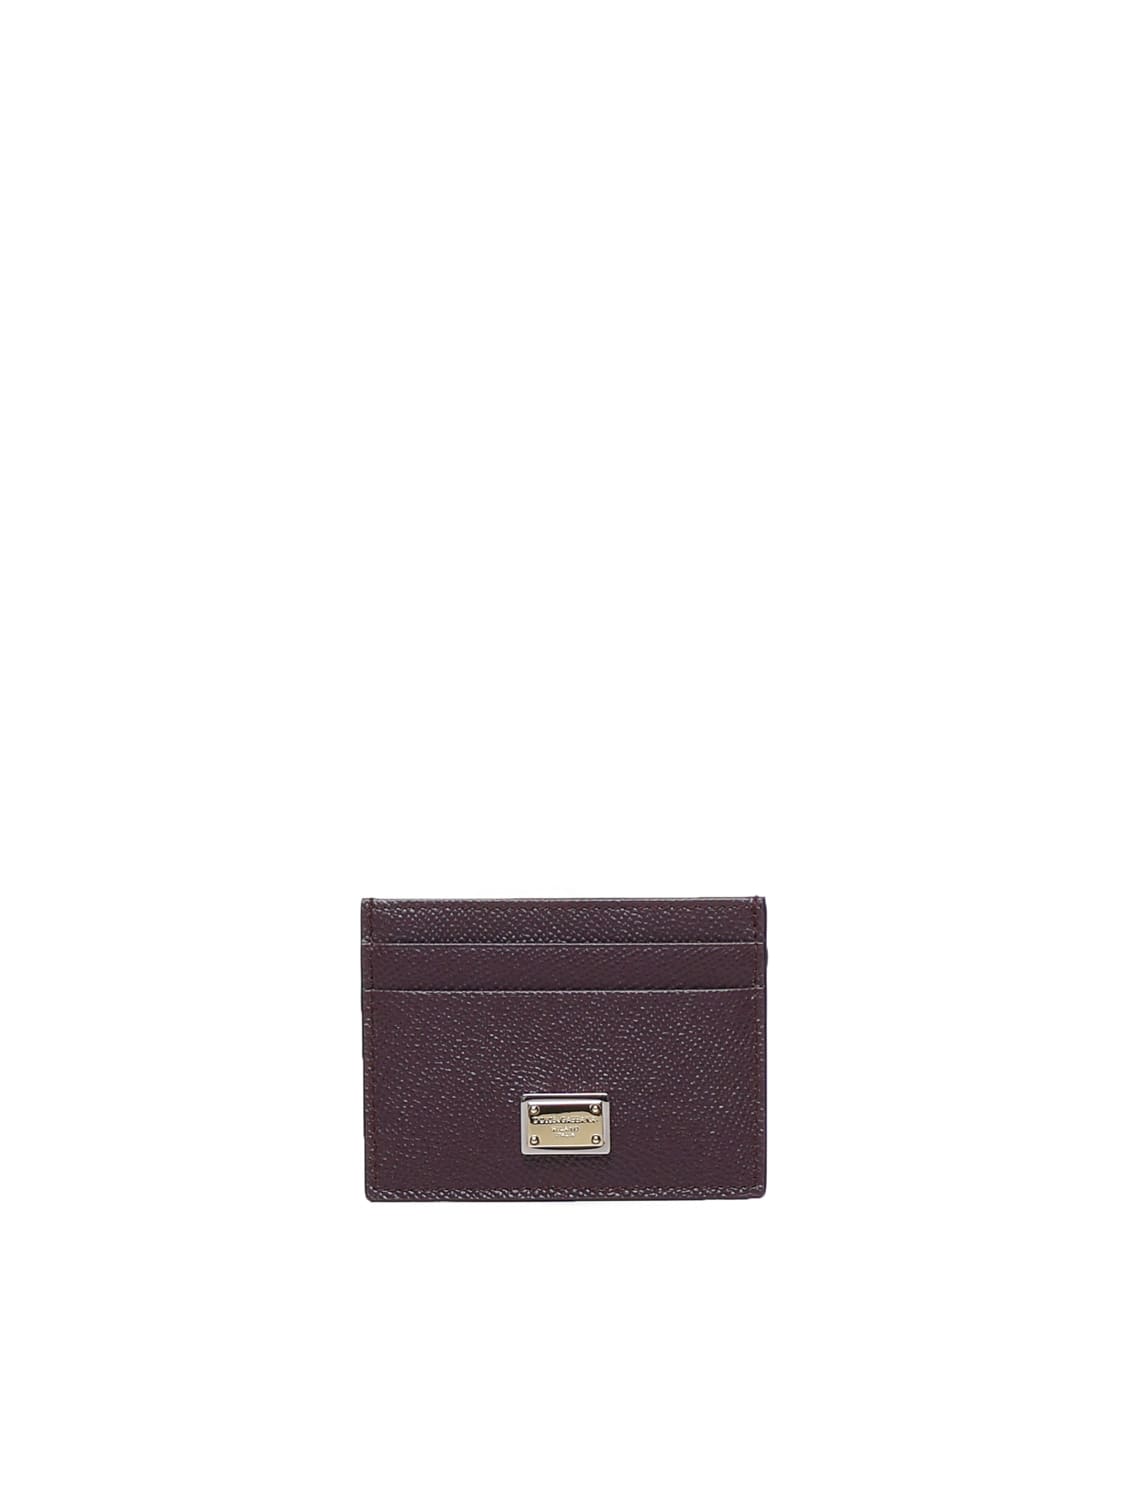 DOLCE & GABBANA CARD HOLDER WITH LOGO PLAQUE